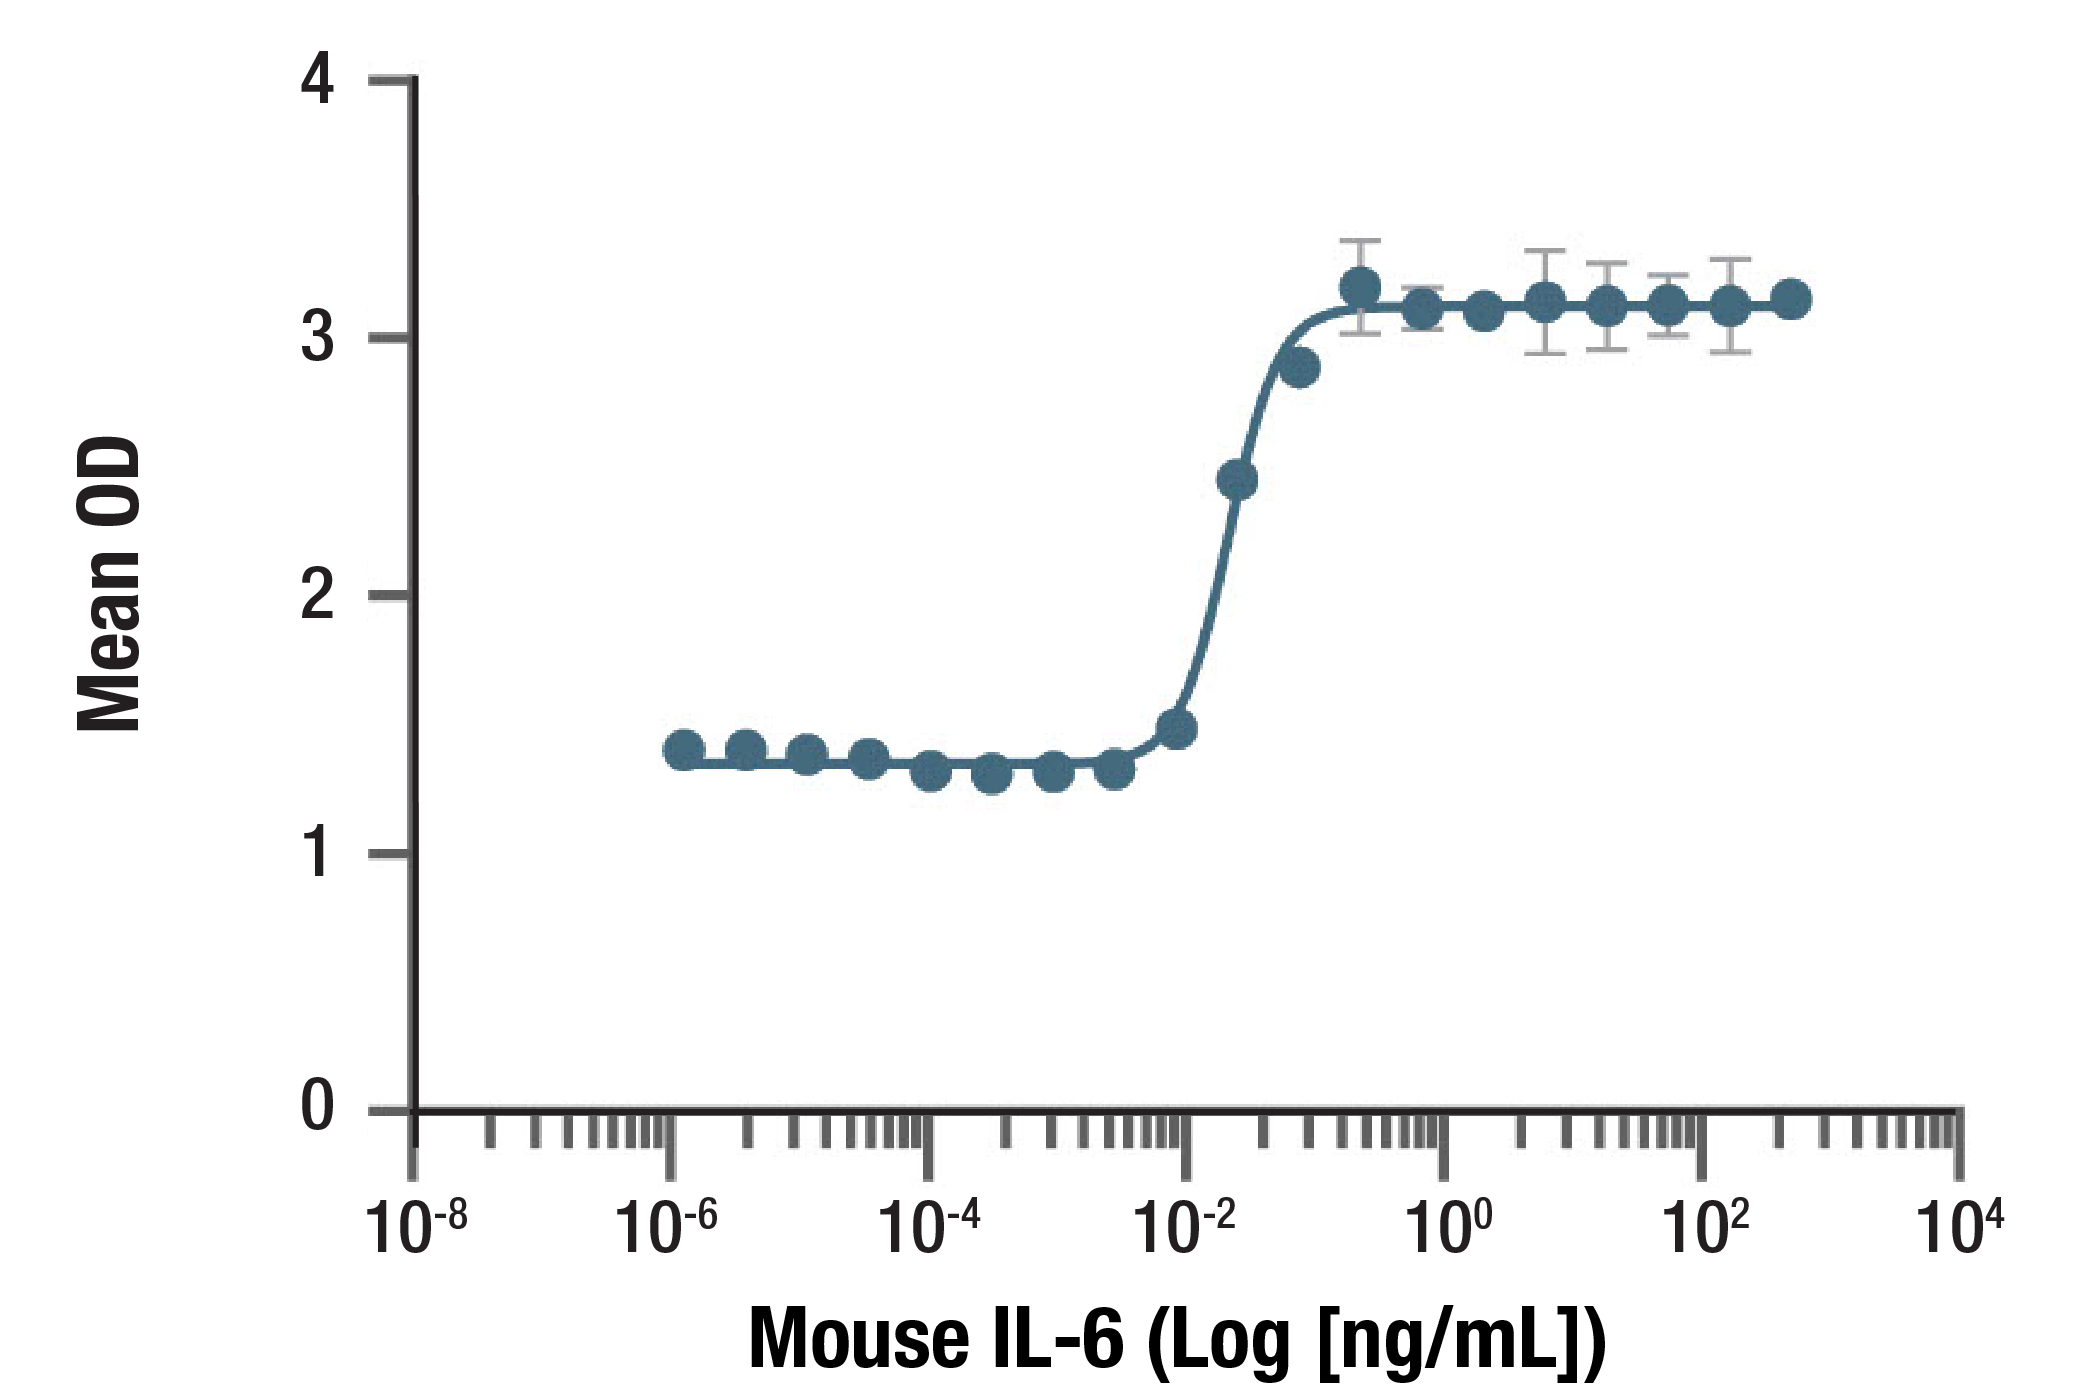  Image 1: Mouse IL-6 Recombinant Protein